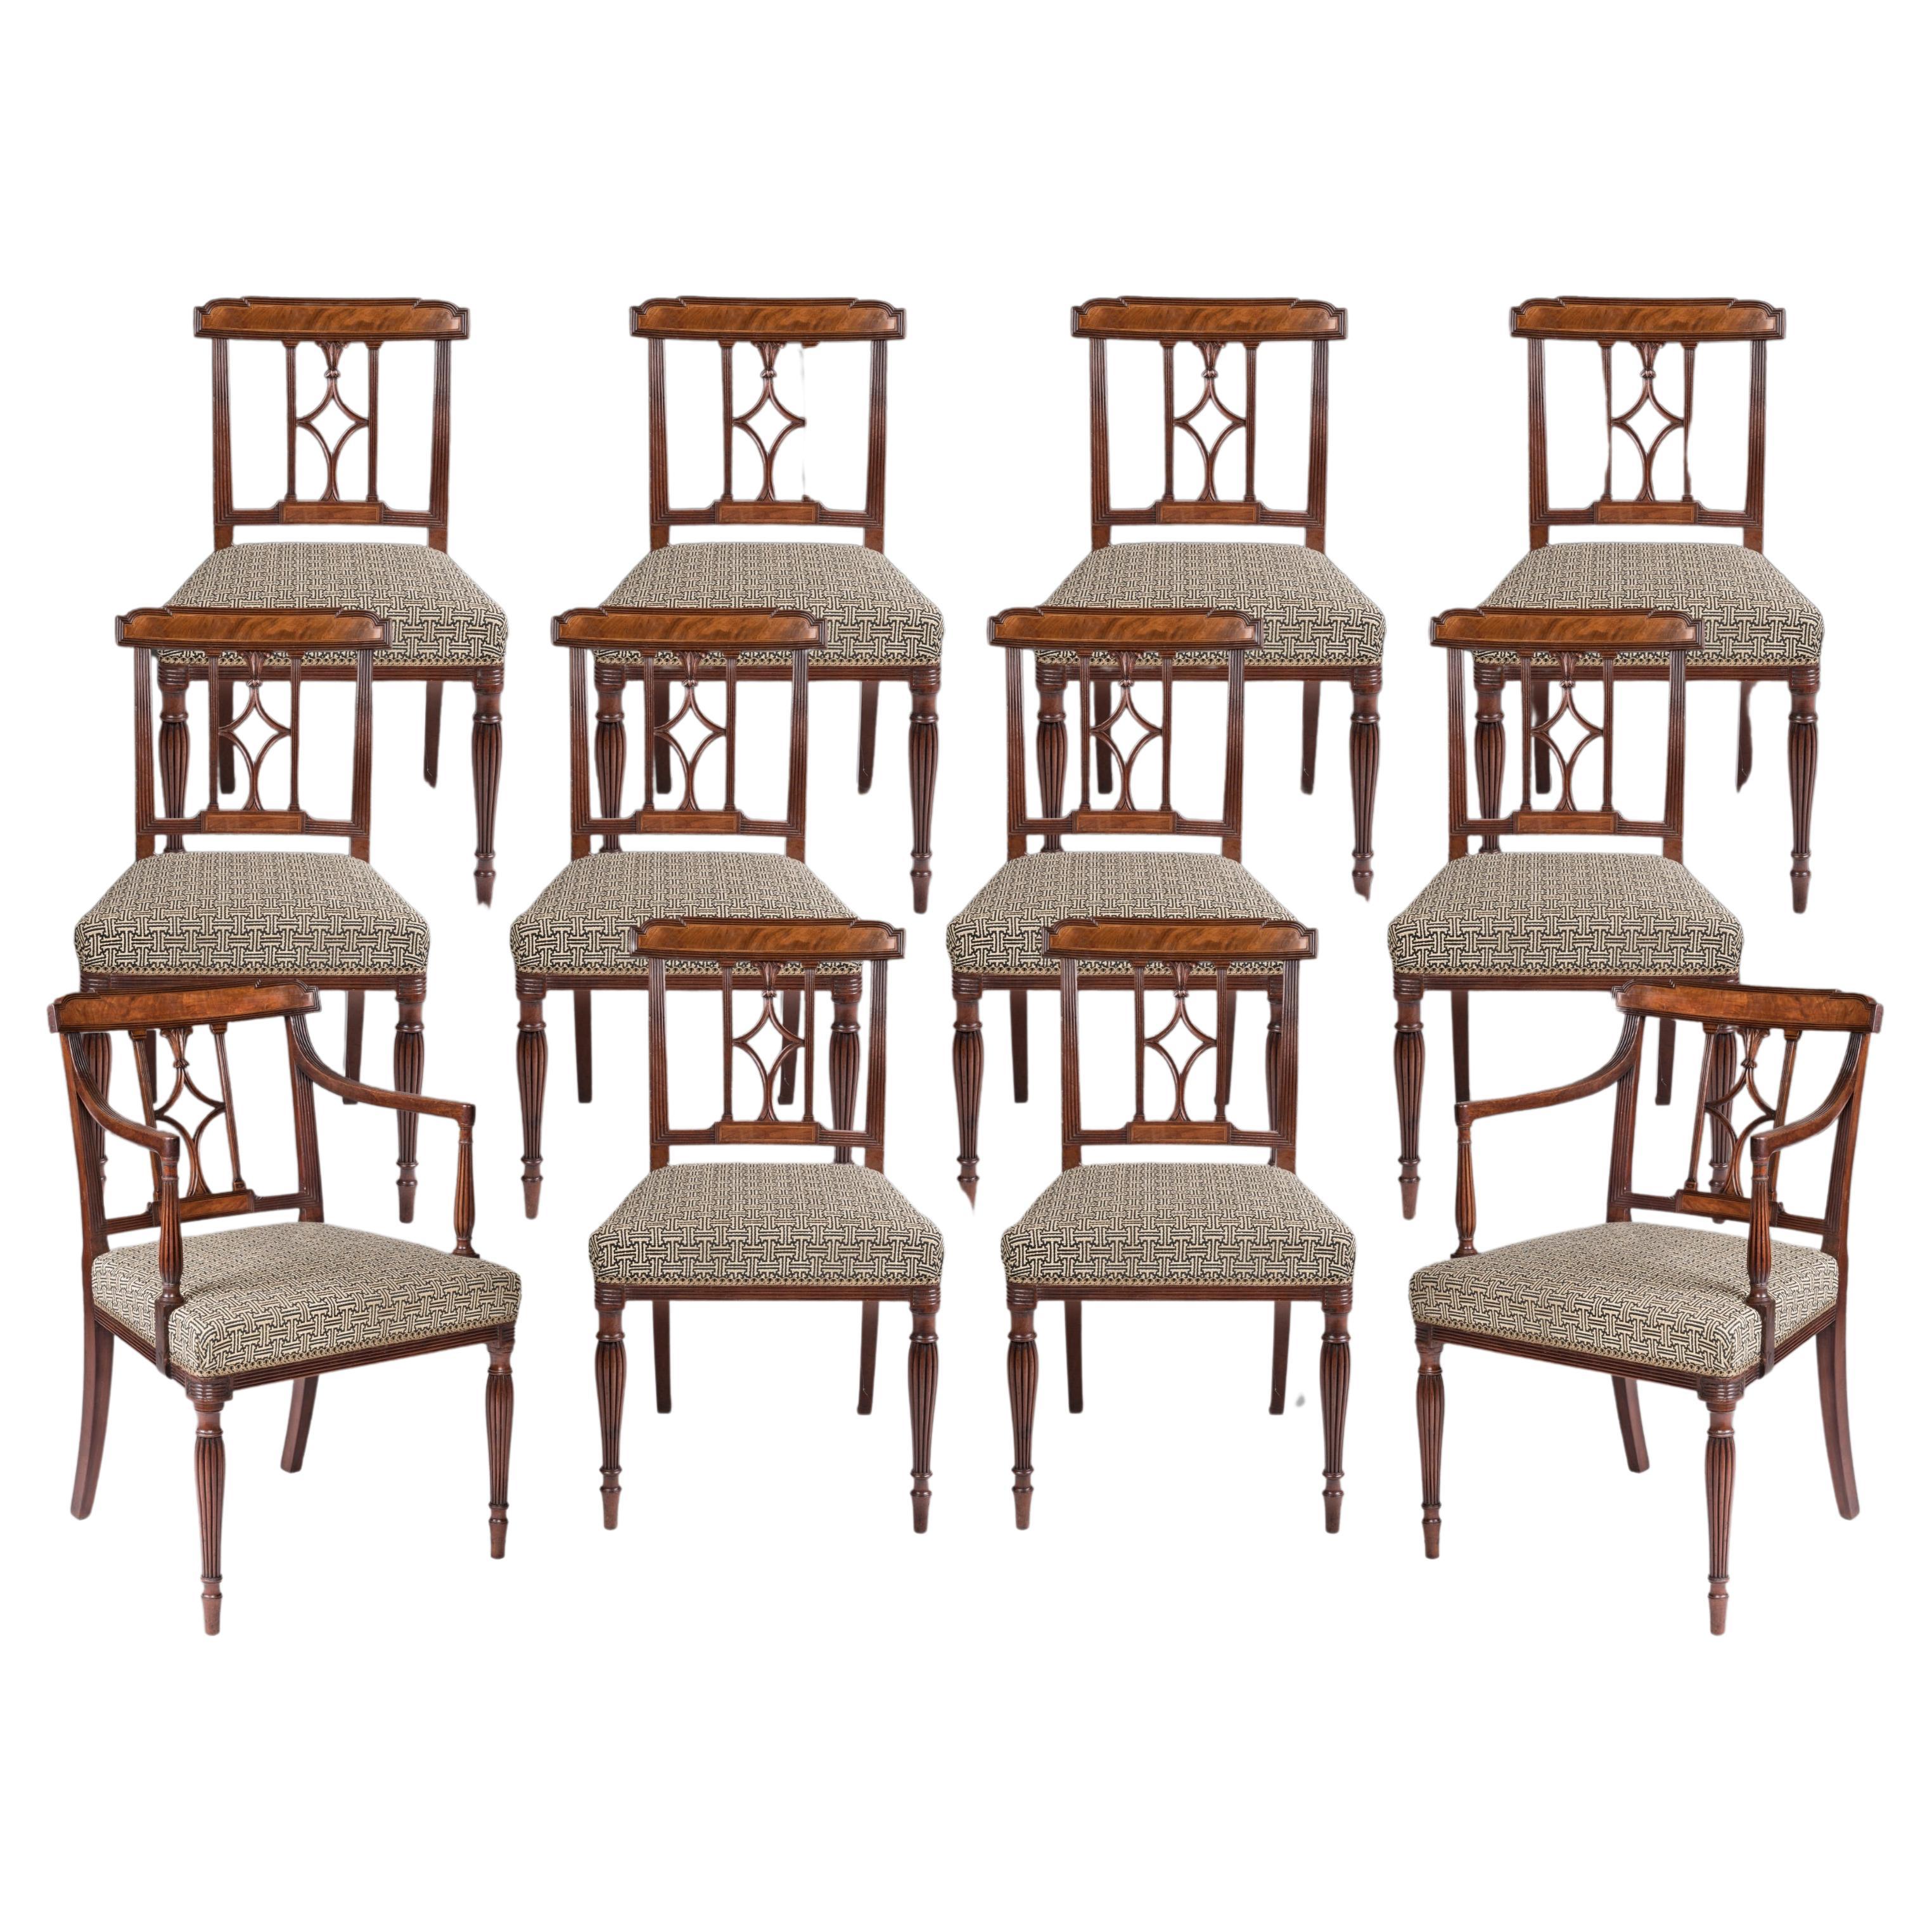 Rare Set of Twelve 18th Century George III Mahogany Dining Chairs For Sale